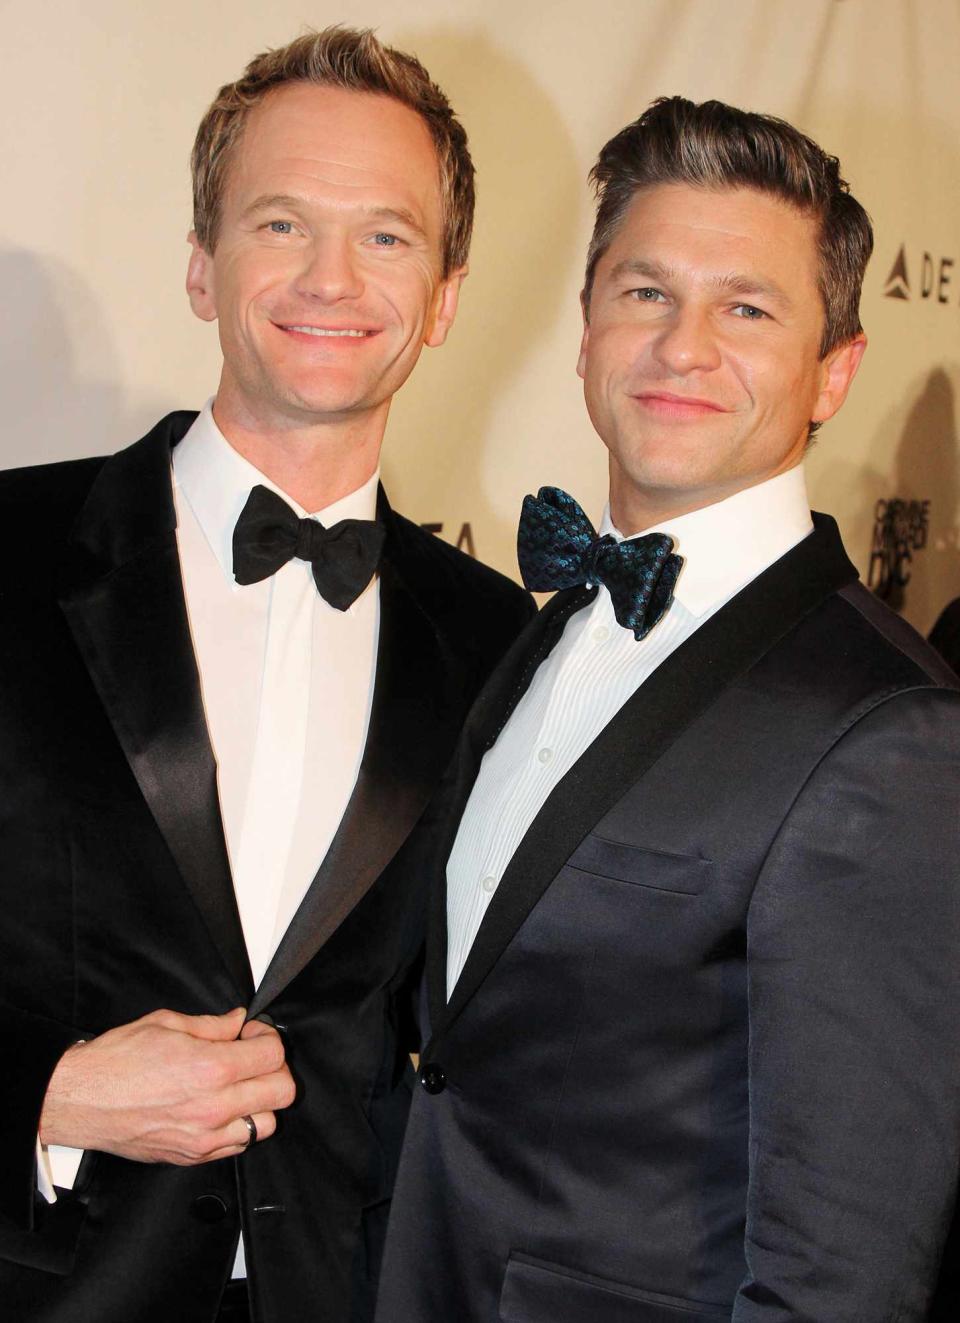 Neil Patrick Harris and husband David Burtka attend The Drama League's 30th Annual Musical celebration of Broadway honoring Neil Patrick Harris at The Pierre Hotel on February 3, 2014 in New York City